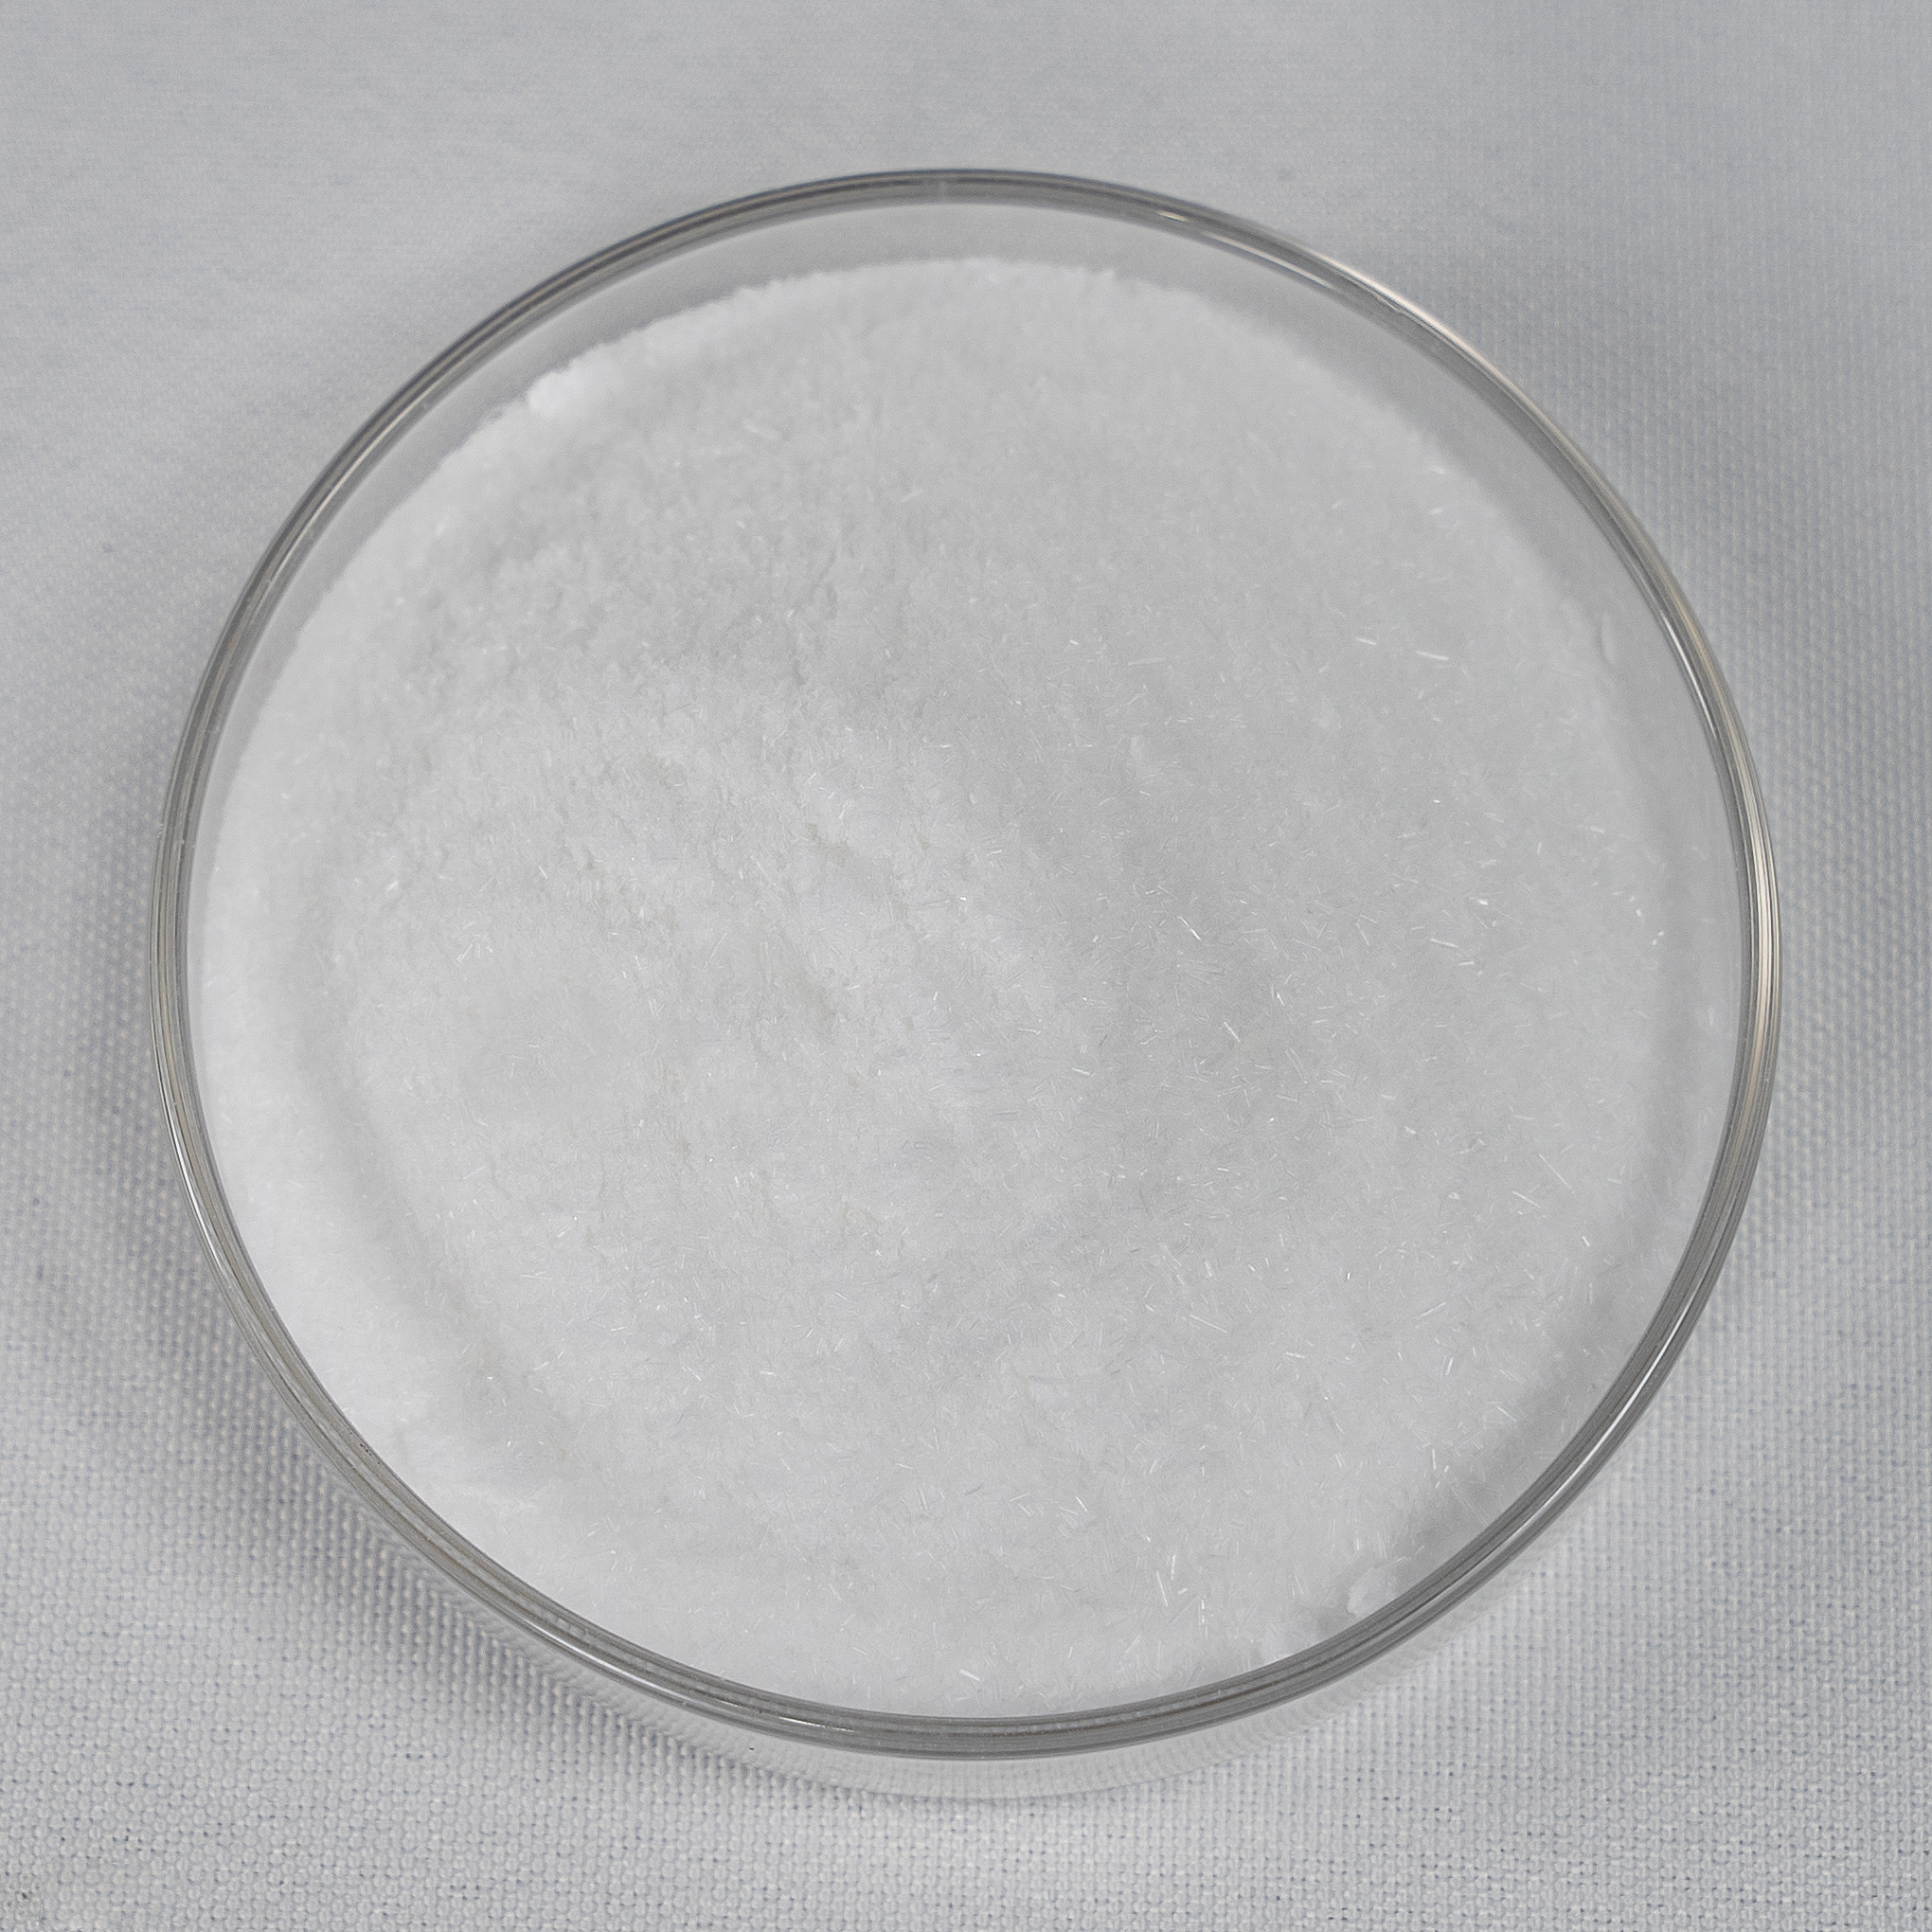 China Manufacturer Supply High Quality Glycine Derivatives Noopept Powder 99% Purity CAS No. 157115-85-0